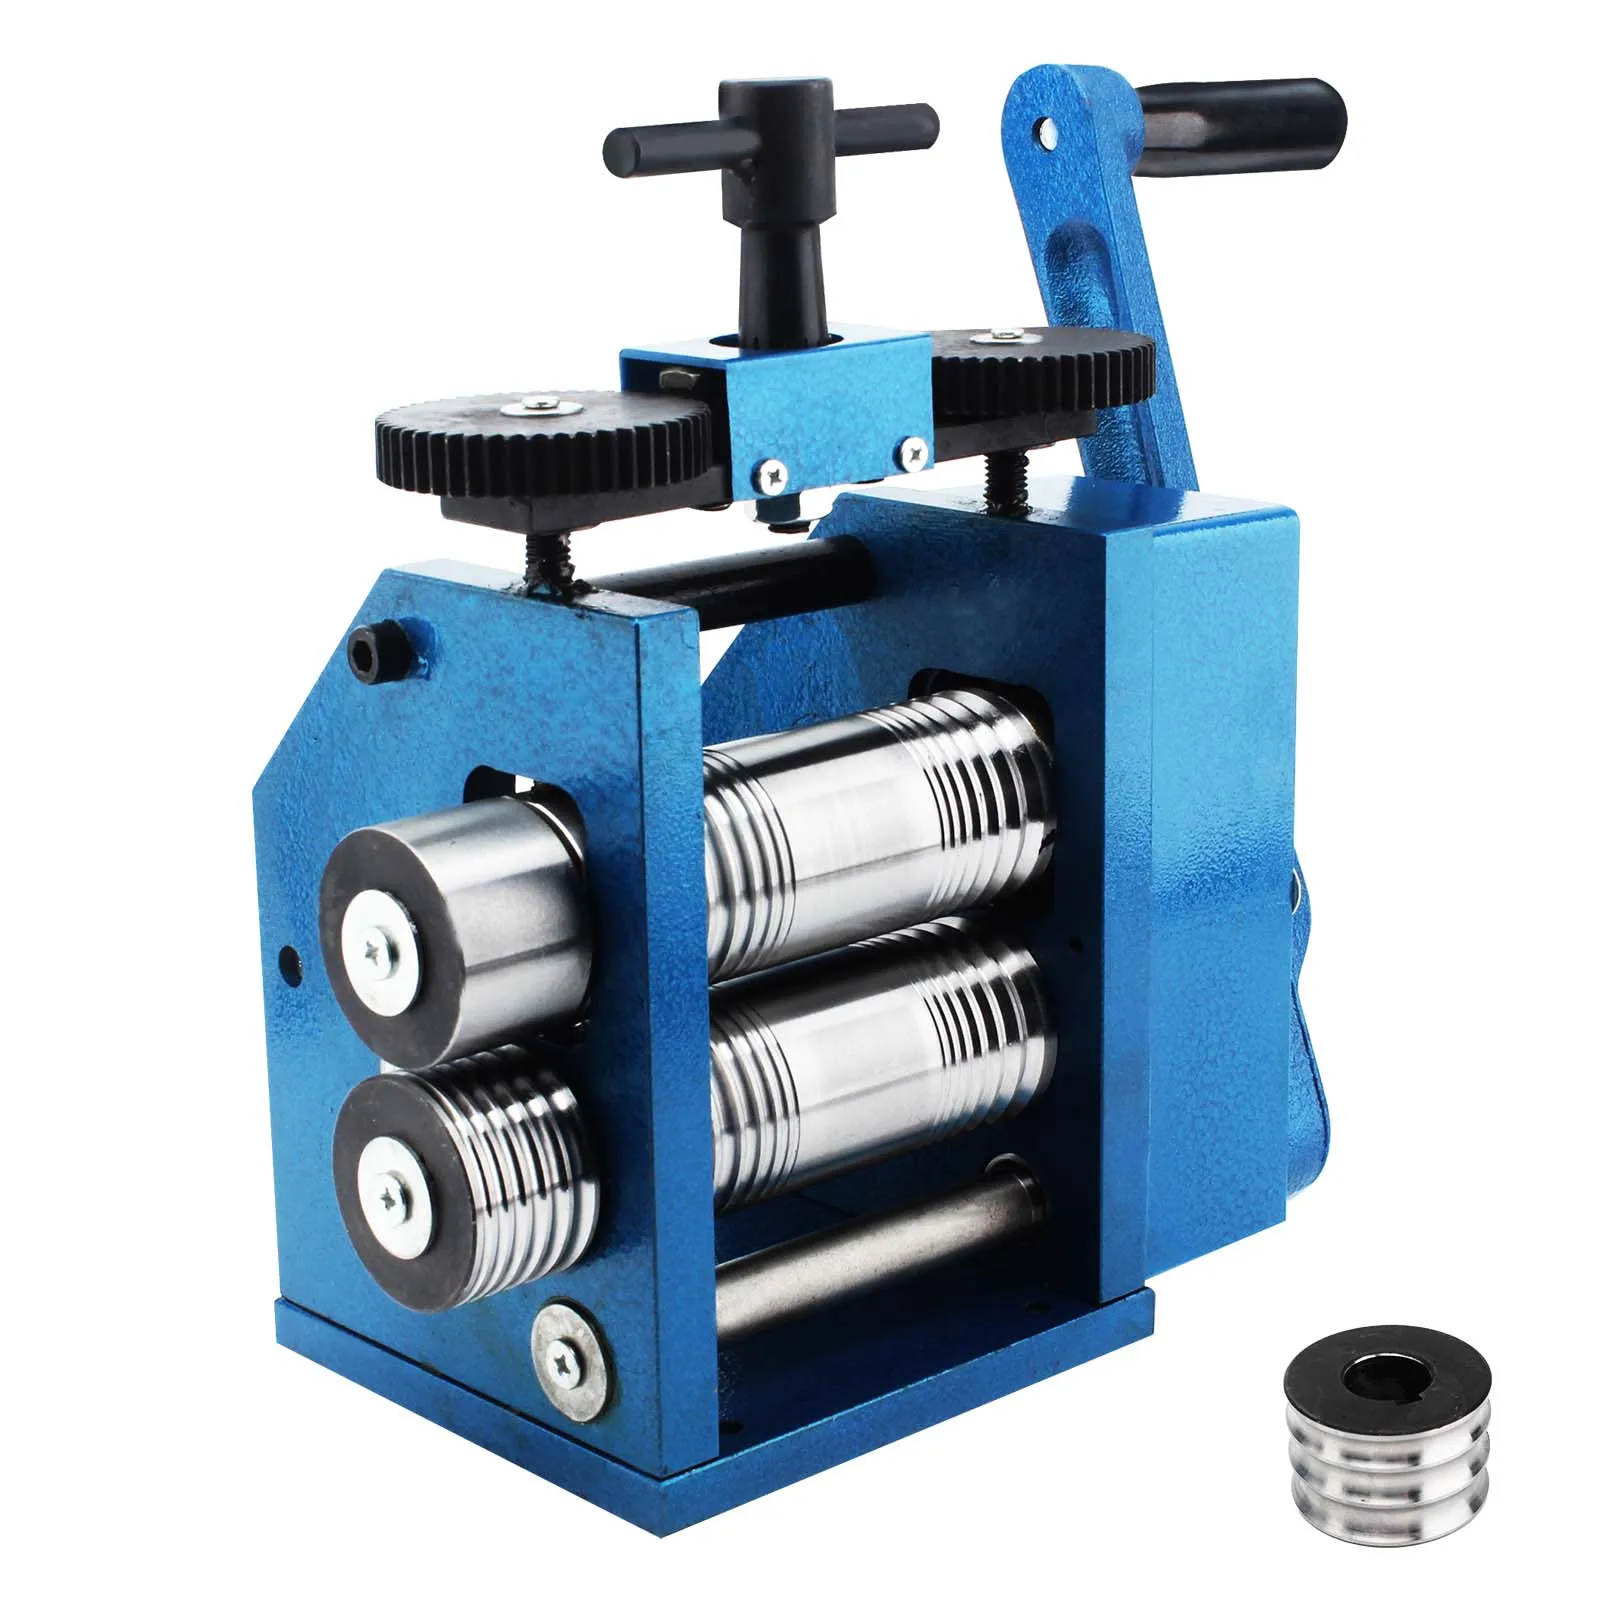 Rolling Mill Machine Jewelry Making Manual Hand Crank Tableting Jewelry Stamping Tool